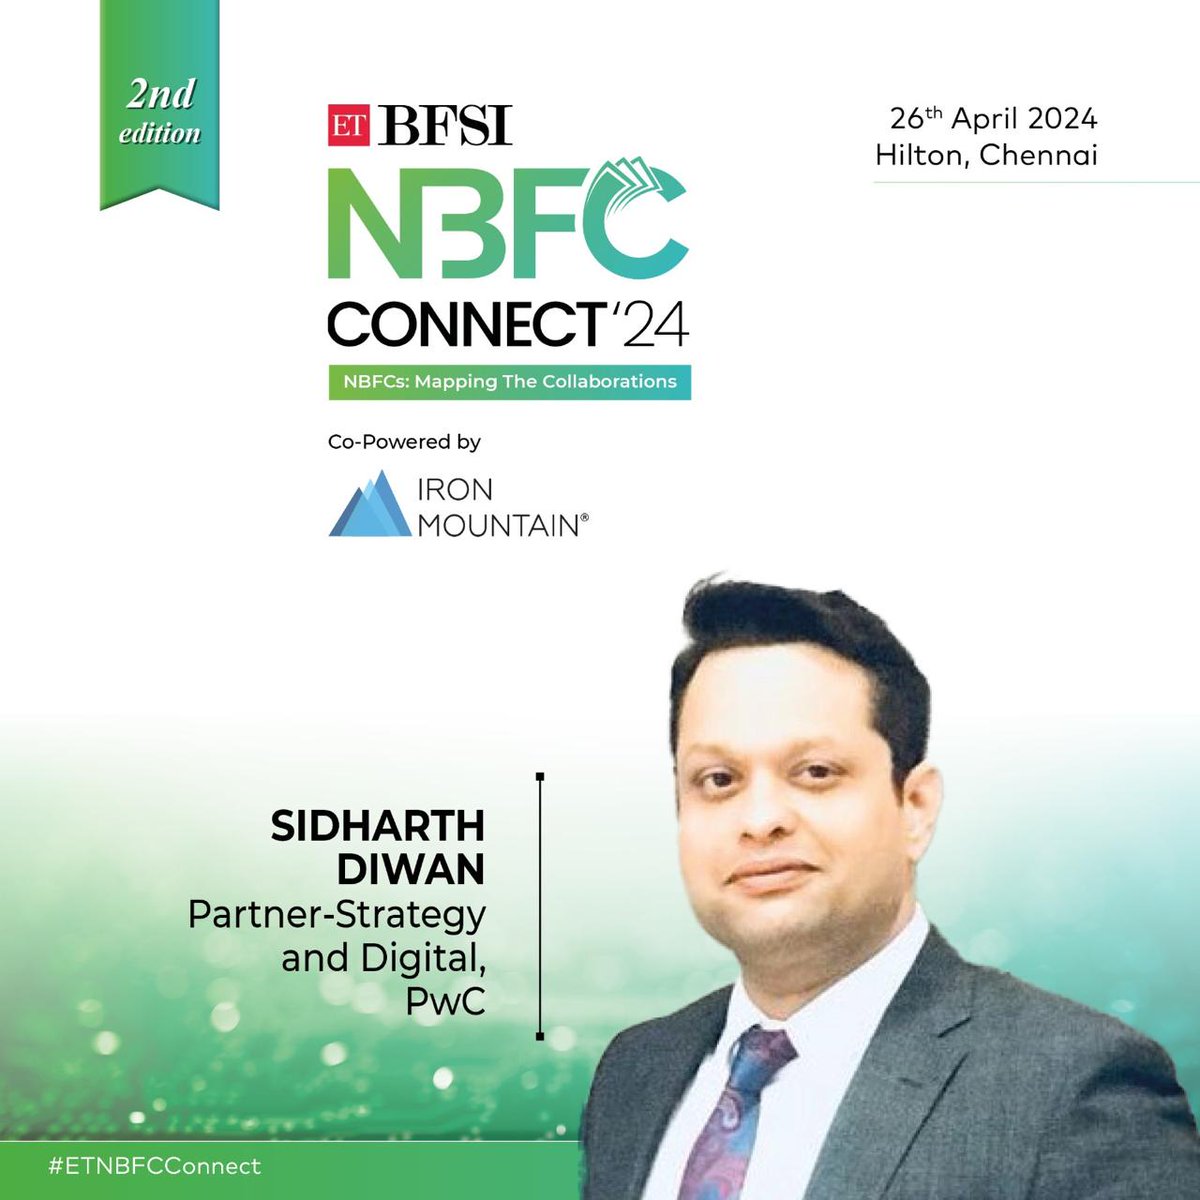 Thrilled to welcome Sidharth Diwan, Partner-Strategy and Digital at @PwC_IN, as one of our distinguished speakers for the ETBFSI NBFC Connect 2024 in Chennai on April 26th! Know more- zurl.co/q8is #ETBFSI #ETNBFCConnect #Chennai2024 #BFSIEvent #Finance #NBFCs